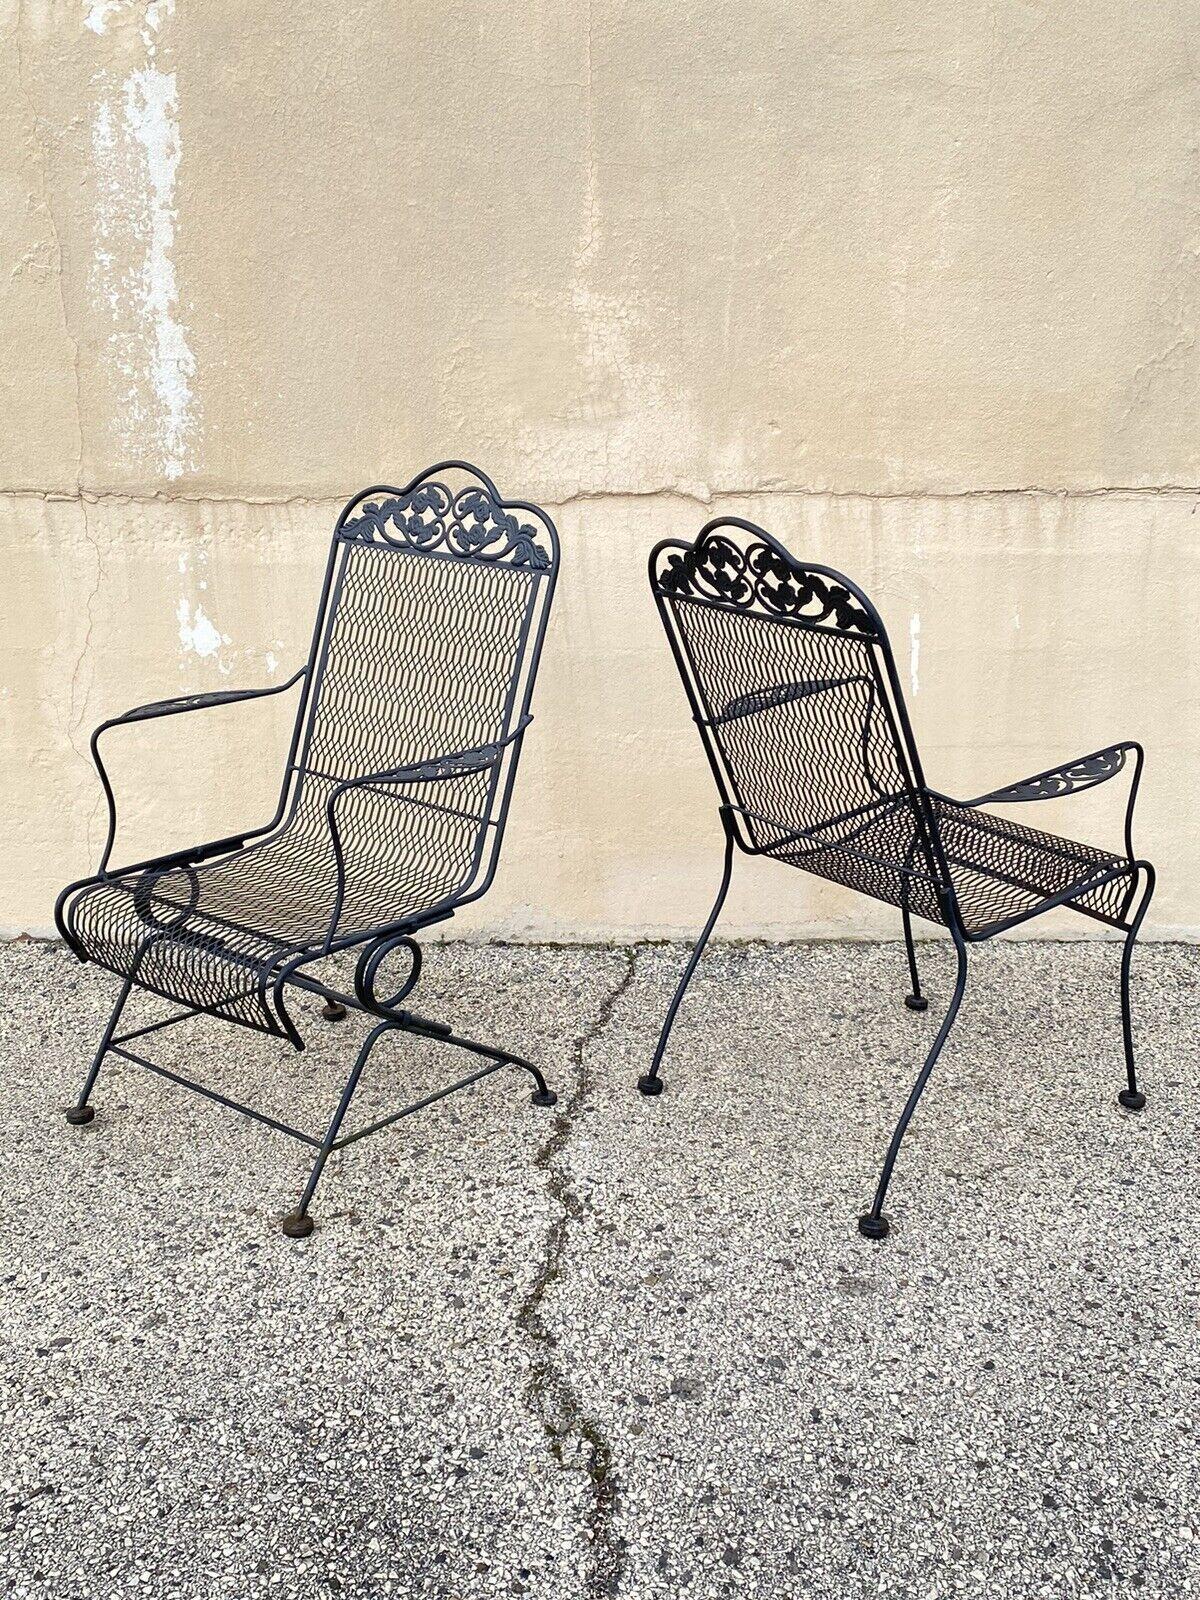 Vintage Wrought Iron Rose and Vine Pattern Garden Patio Chairs - 7 Pc Set For Sale 5